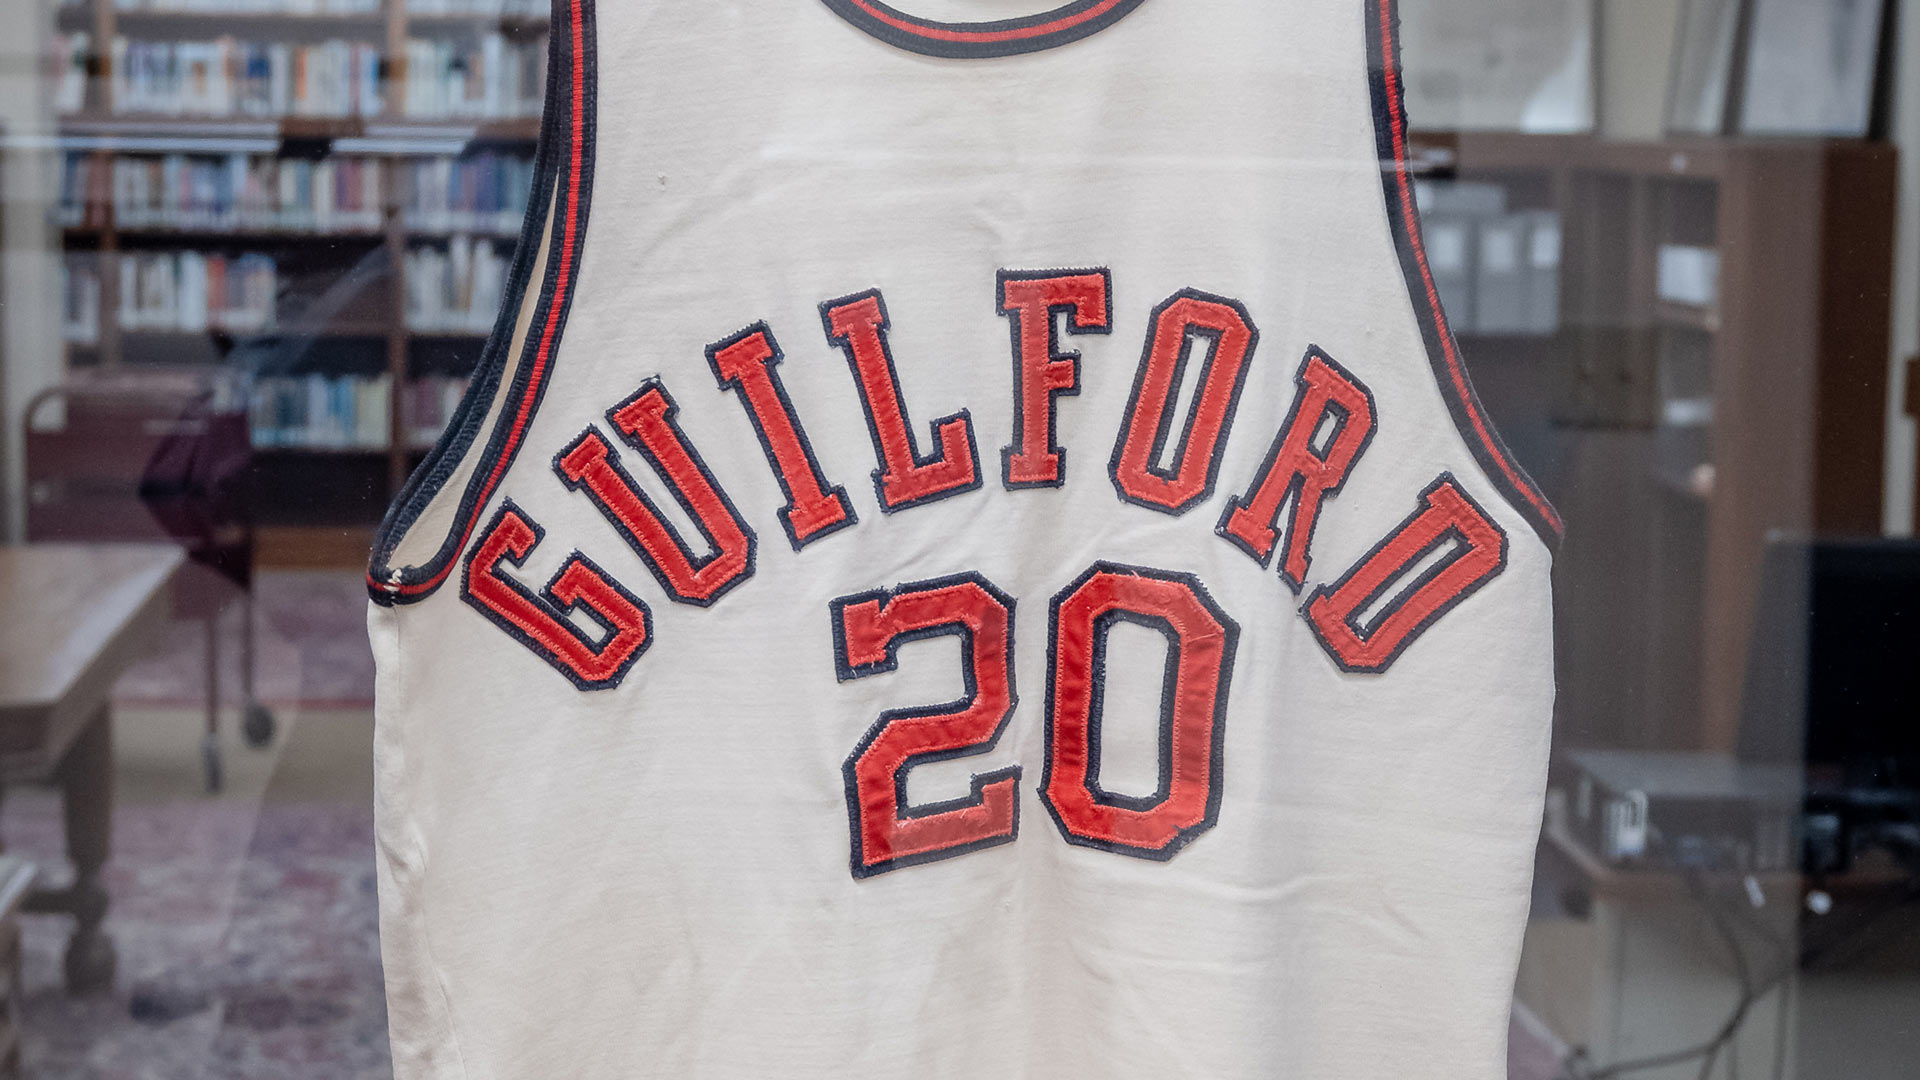 Guilford to Celebrate 50th Anniversary of NAIA Title